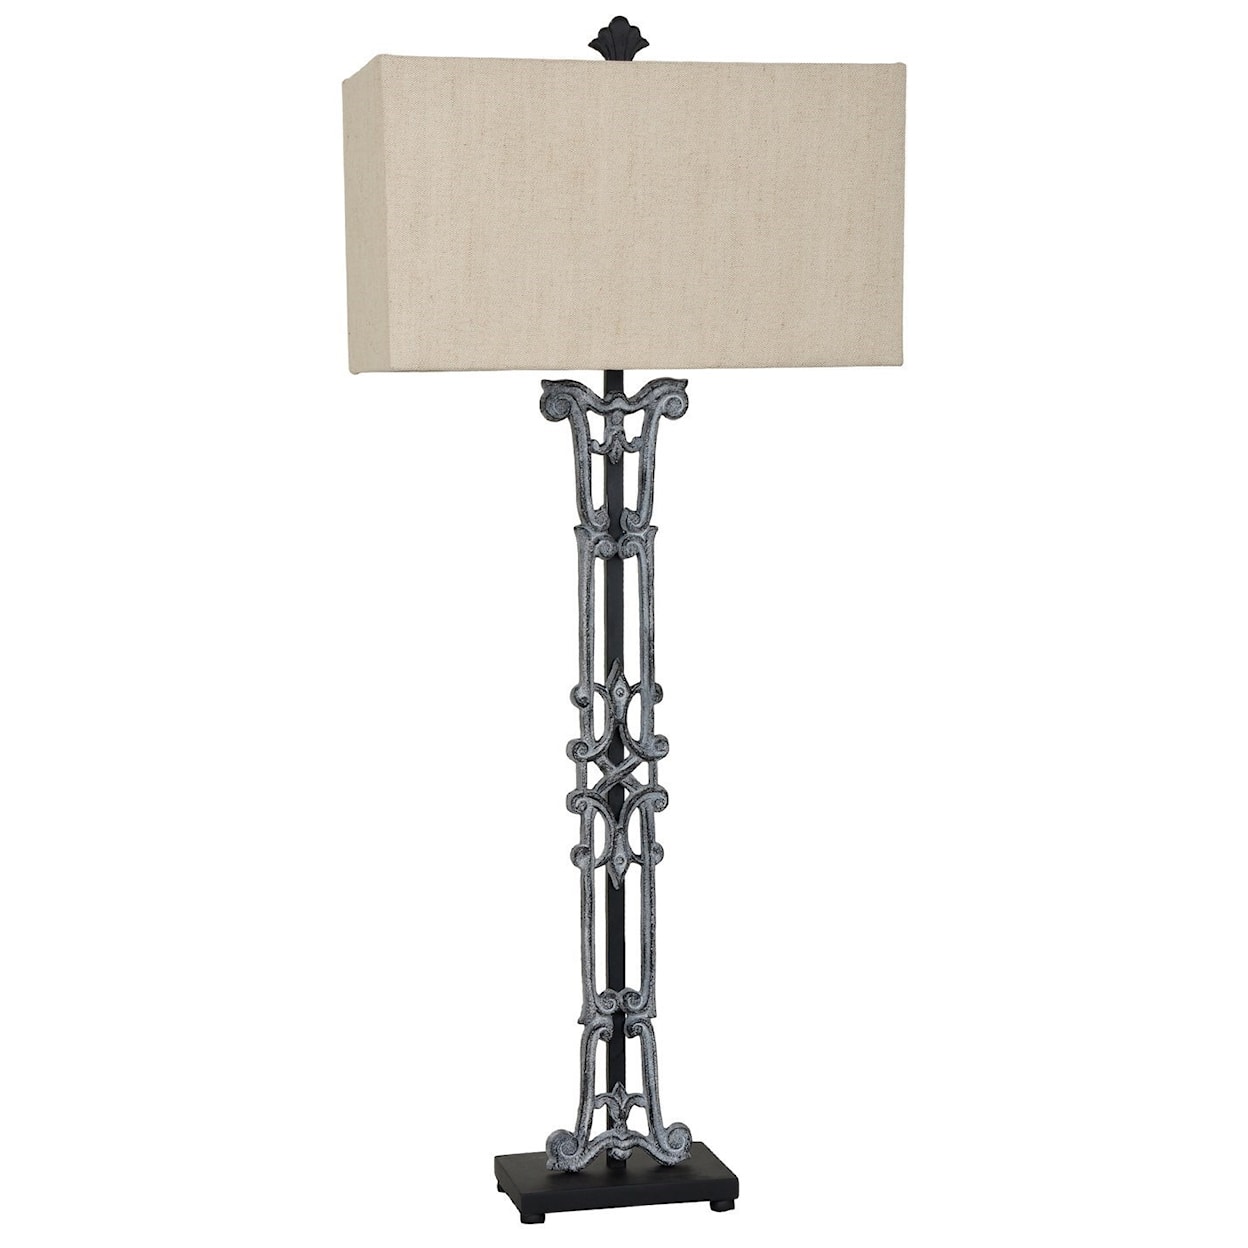 Crestview Collection Lighting Maxwell Table Lamp